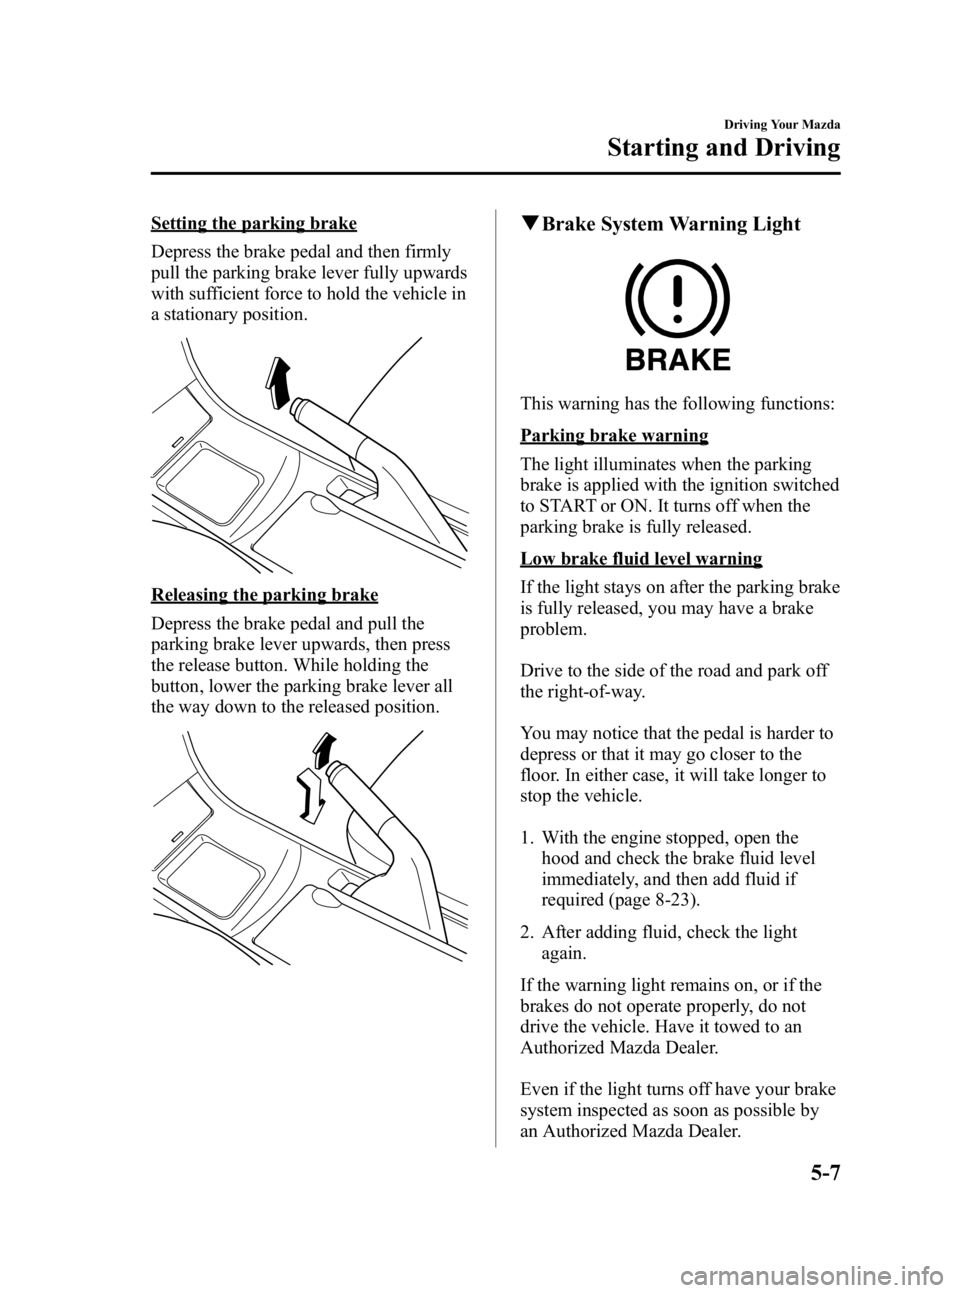 MAZDA MODEL 3 5-DOOR 2010  Owners Manual Black plate (167,1)
Setting the parking brake
Depress the brake pedal and then firmly
pull the parking brake lever fully upwards
with sufficient force to hold the vehicle in
a stationary position.
Rel